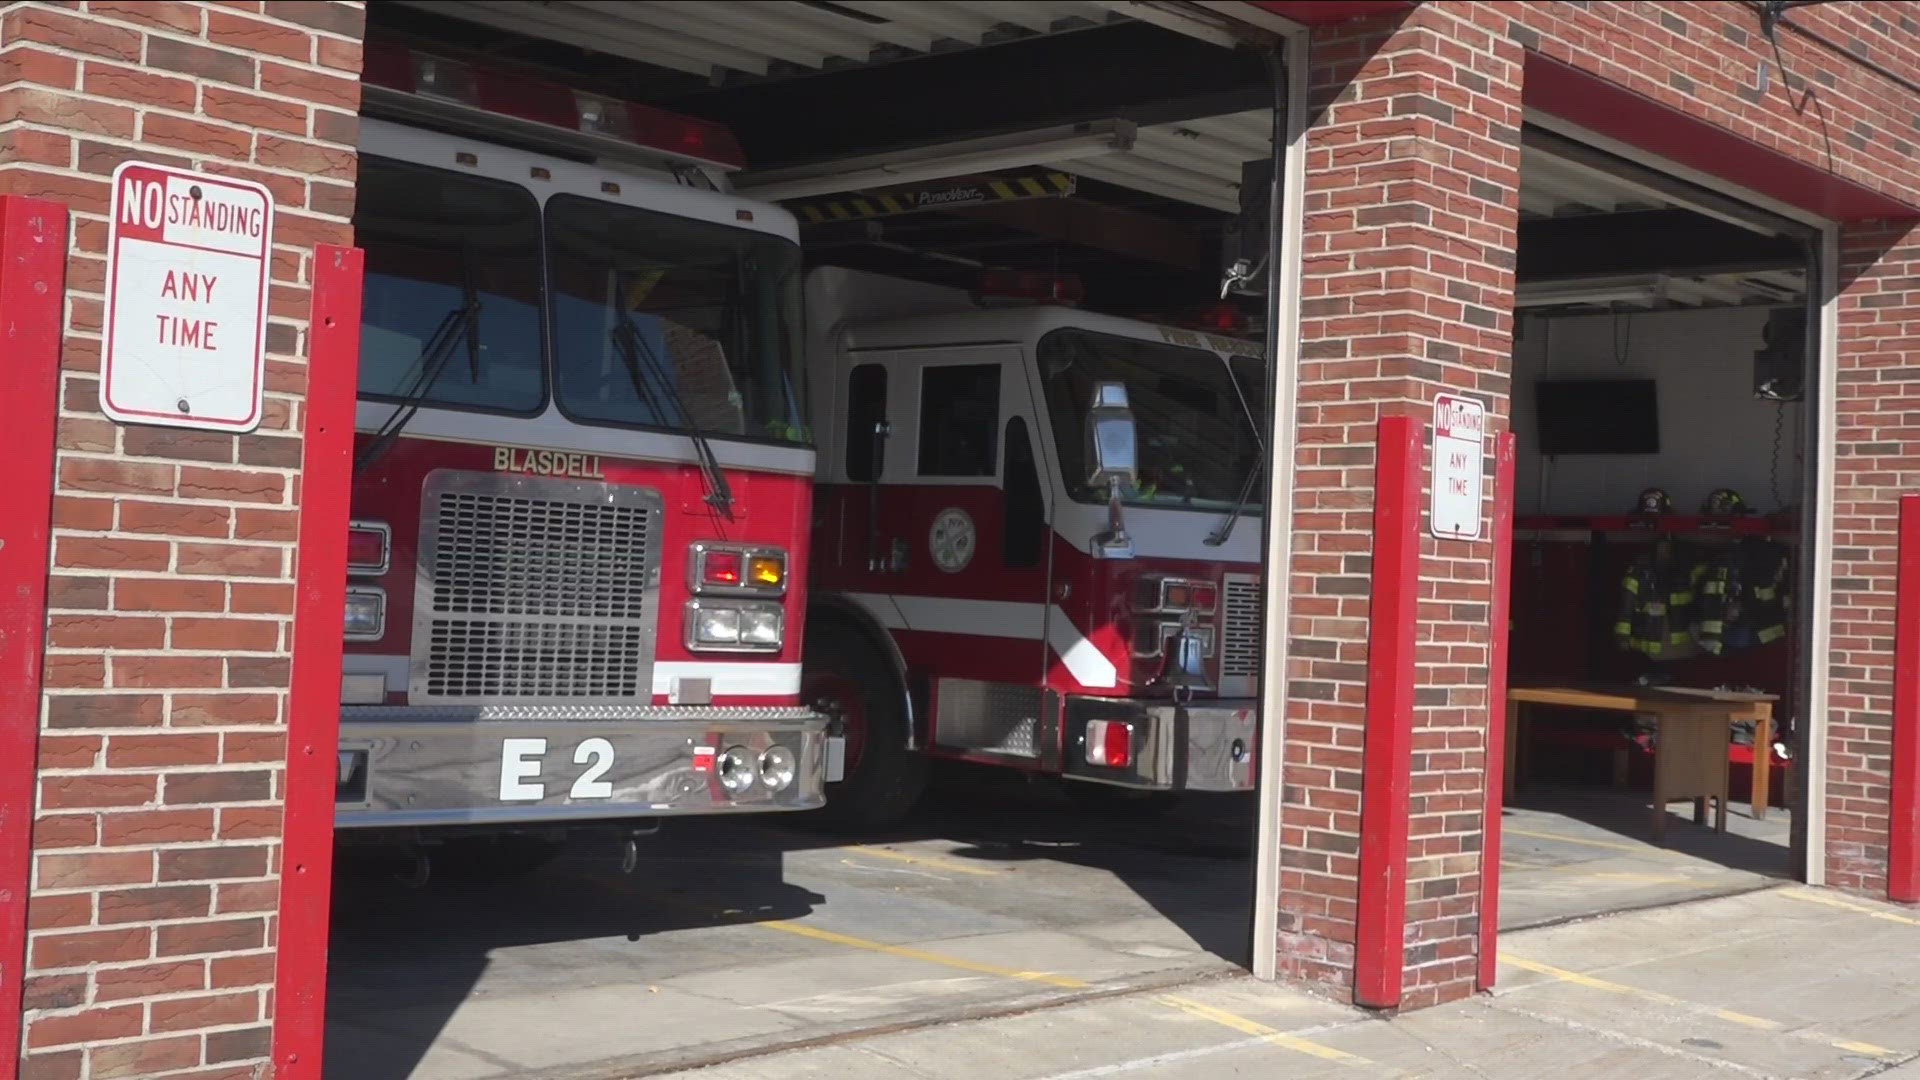 Blasdell fire department looks to nearby fire companies for help as they struggle with recruitment issues